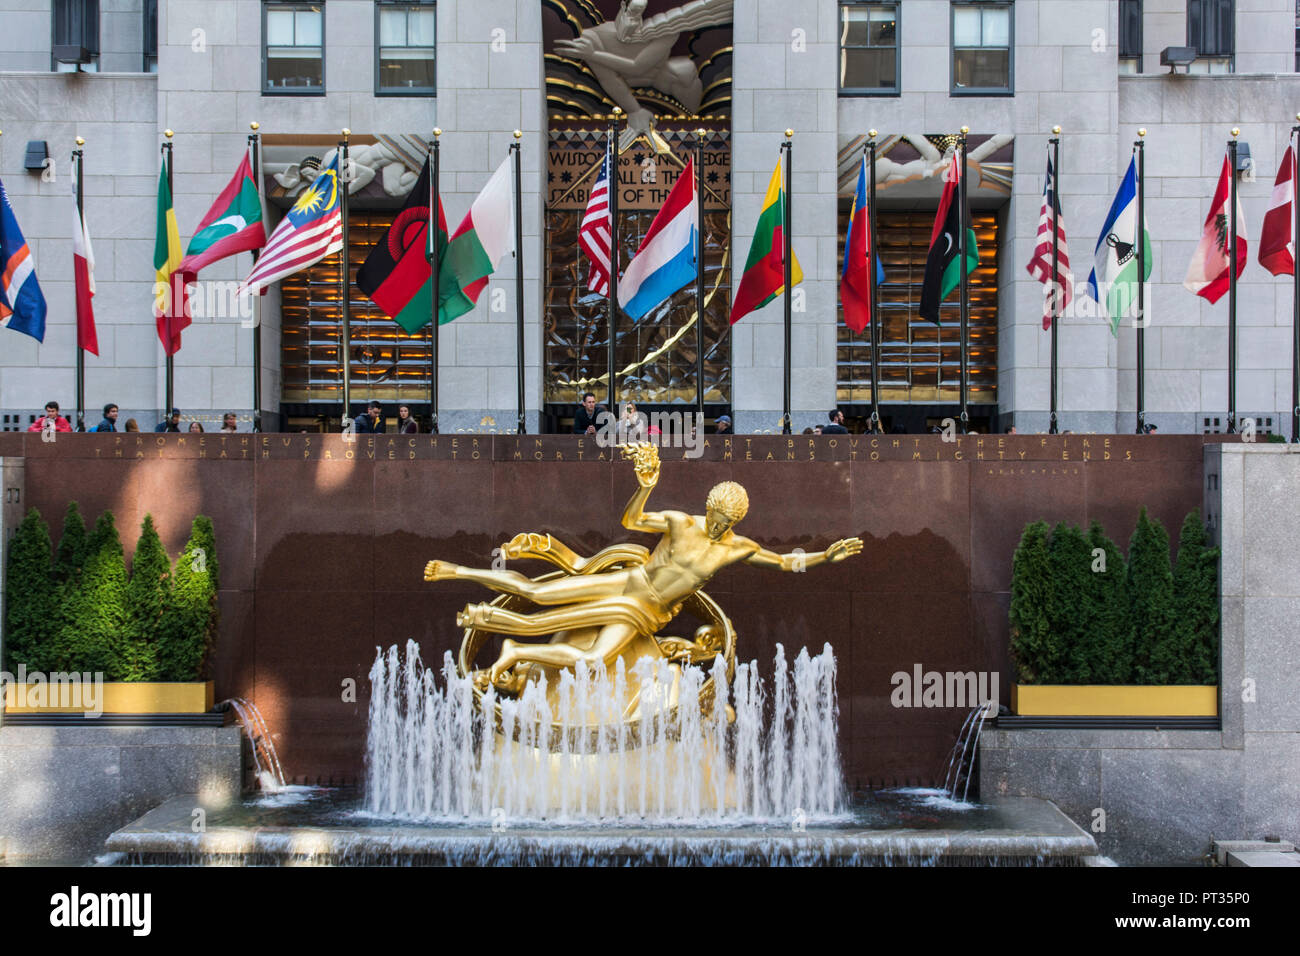 Sculpture in the Rockefeller Center of New York in the USA Stock Photo